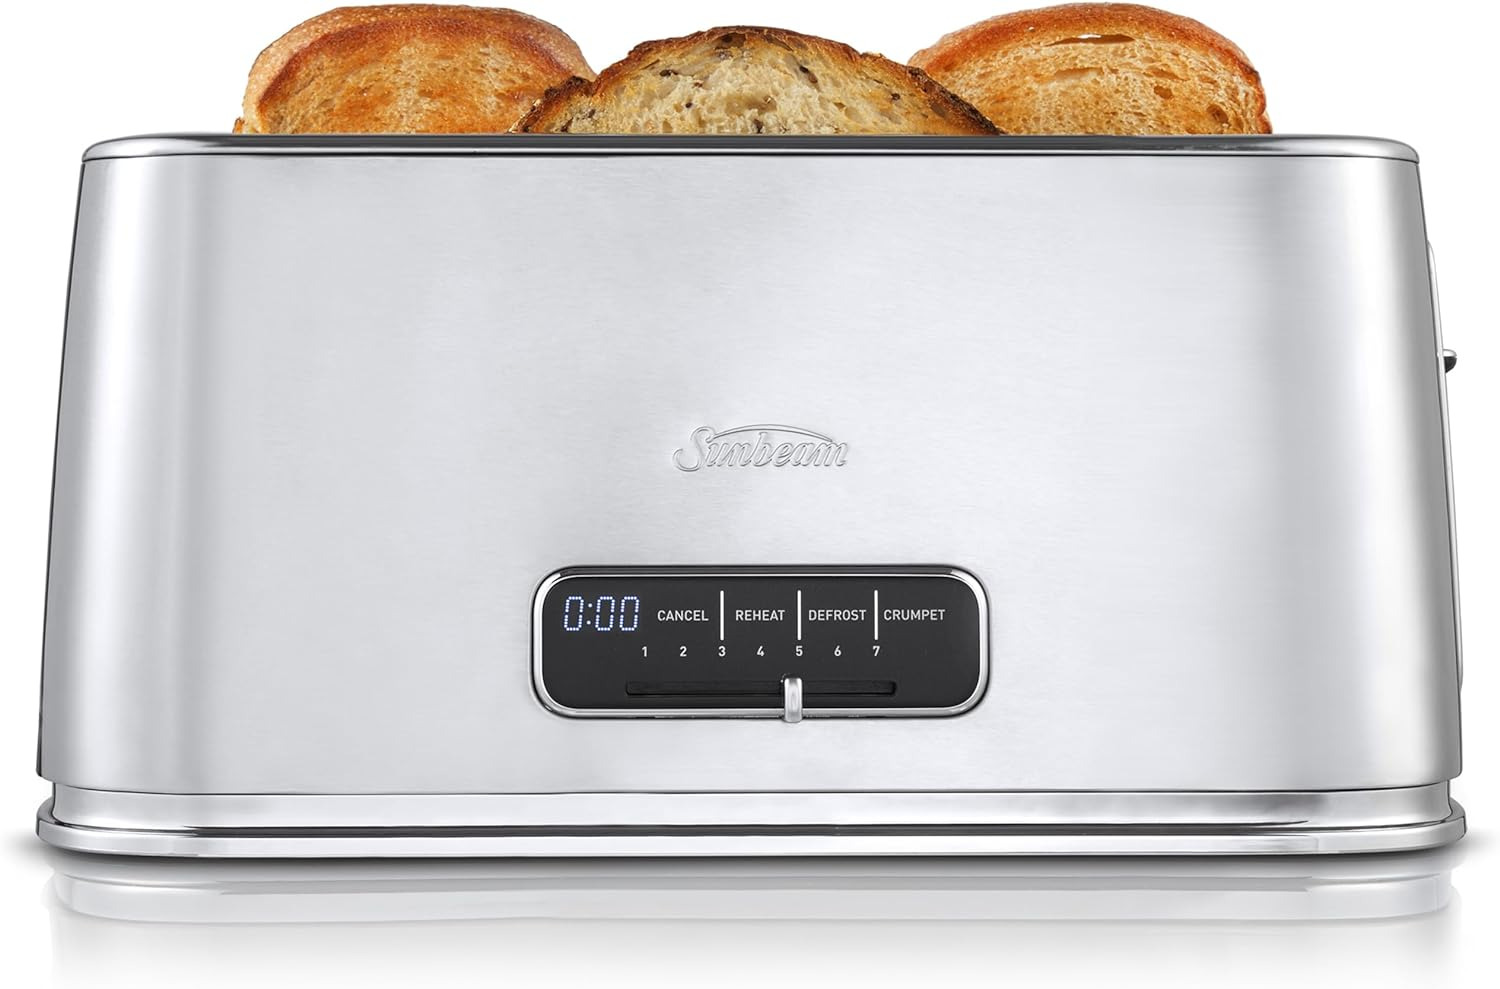 Arise Long Slot 4-Slice Toaster | Toast Various Bread Types, LED Countdown Timer